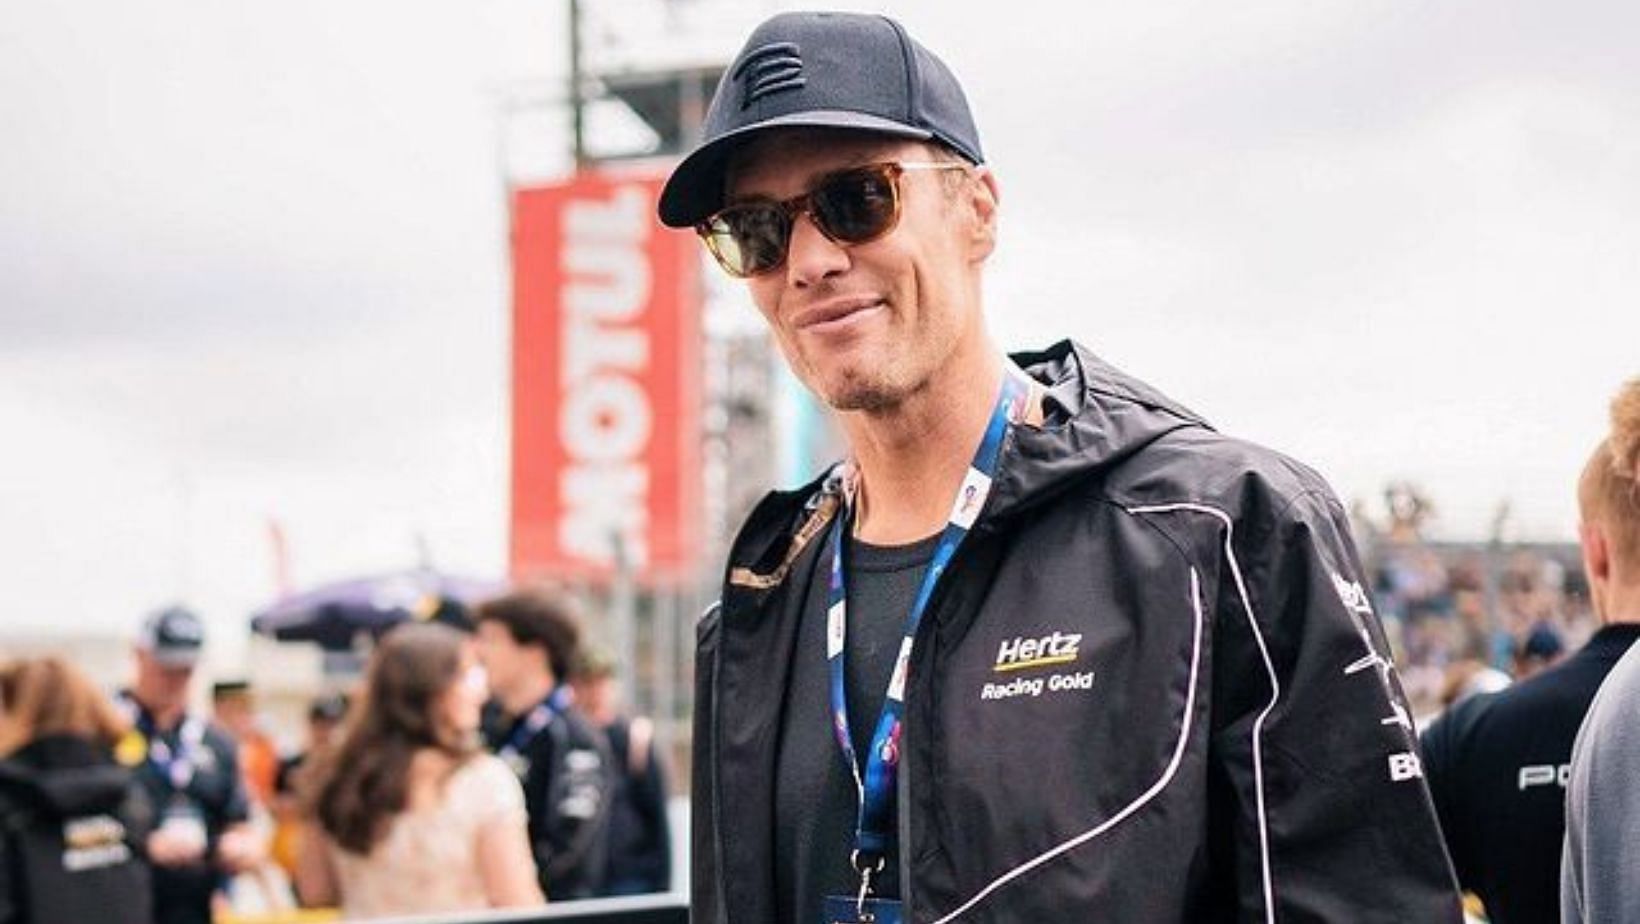 Seven-time Super Bowl champ Tom Brady spotted at Le Mans (Image courtesy: Brady